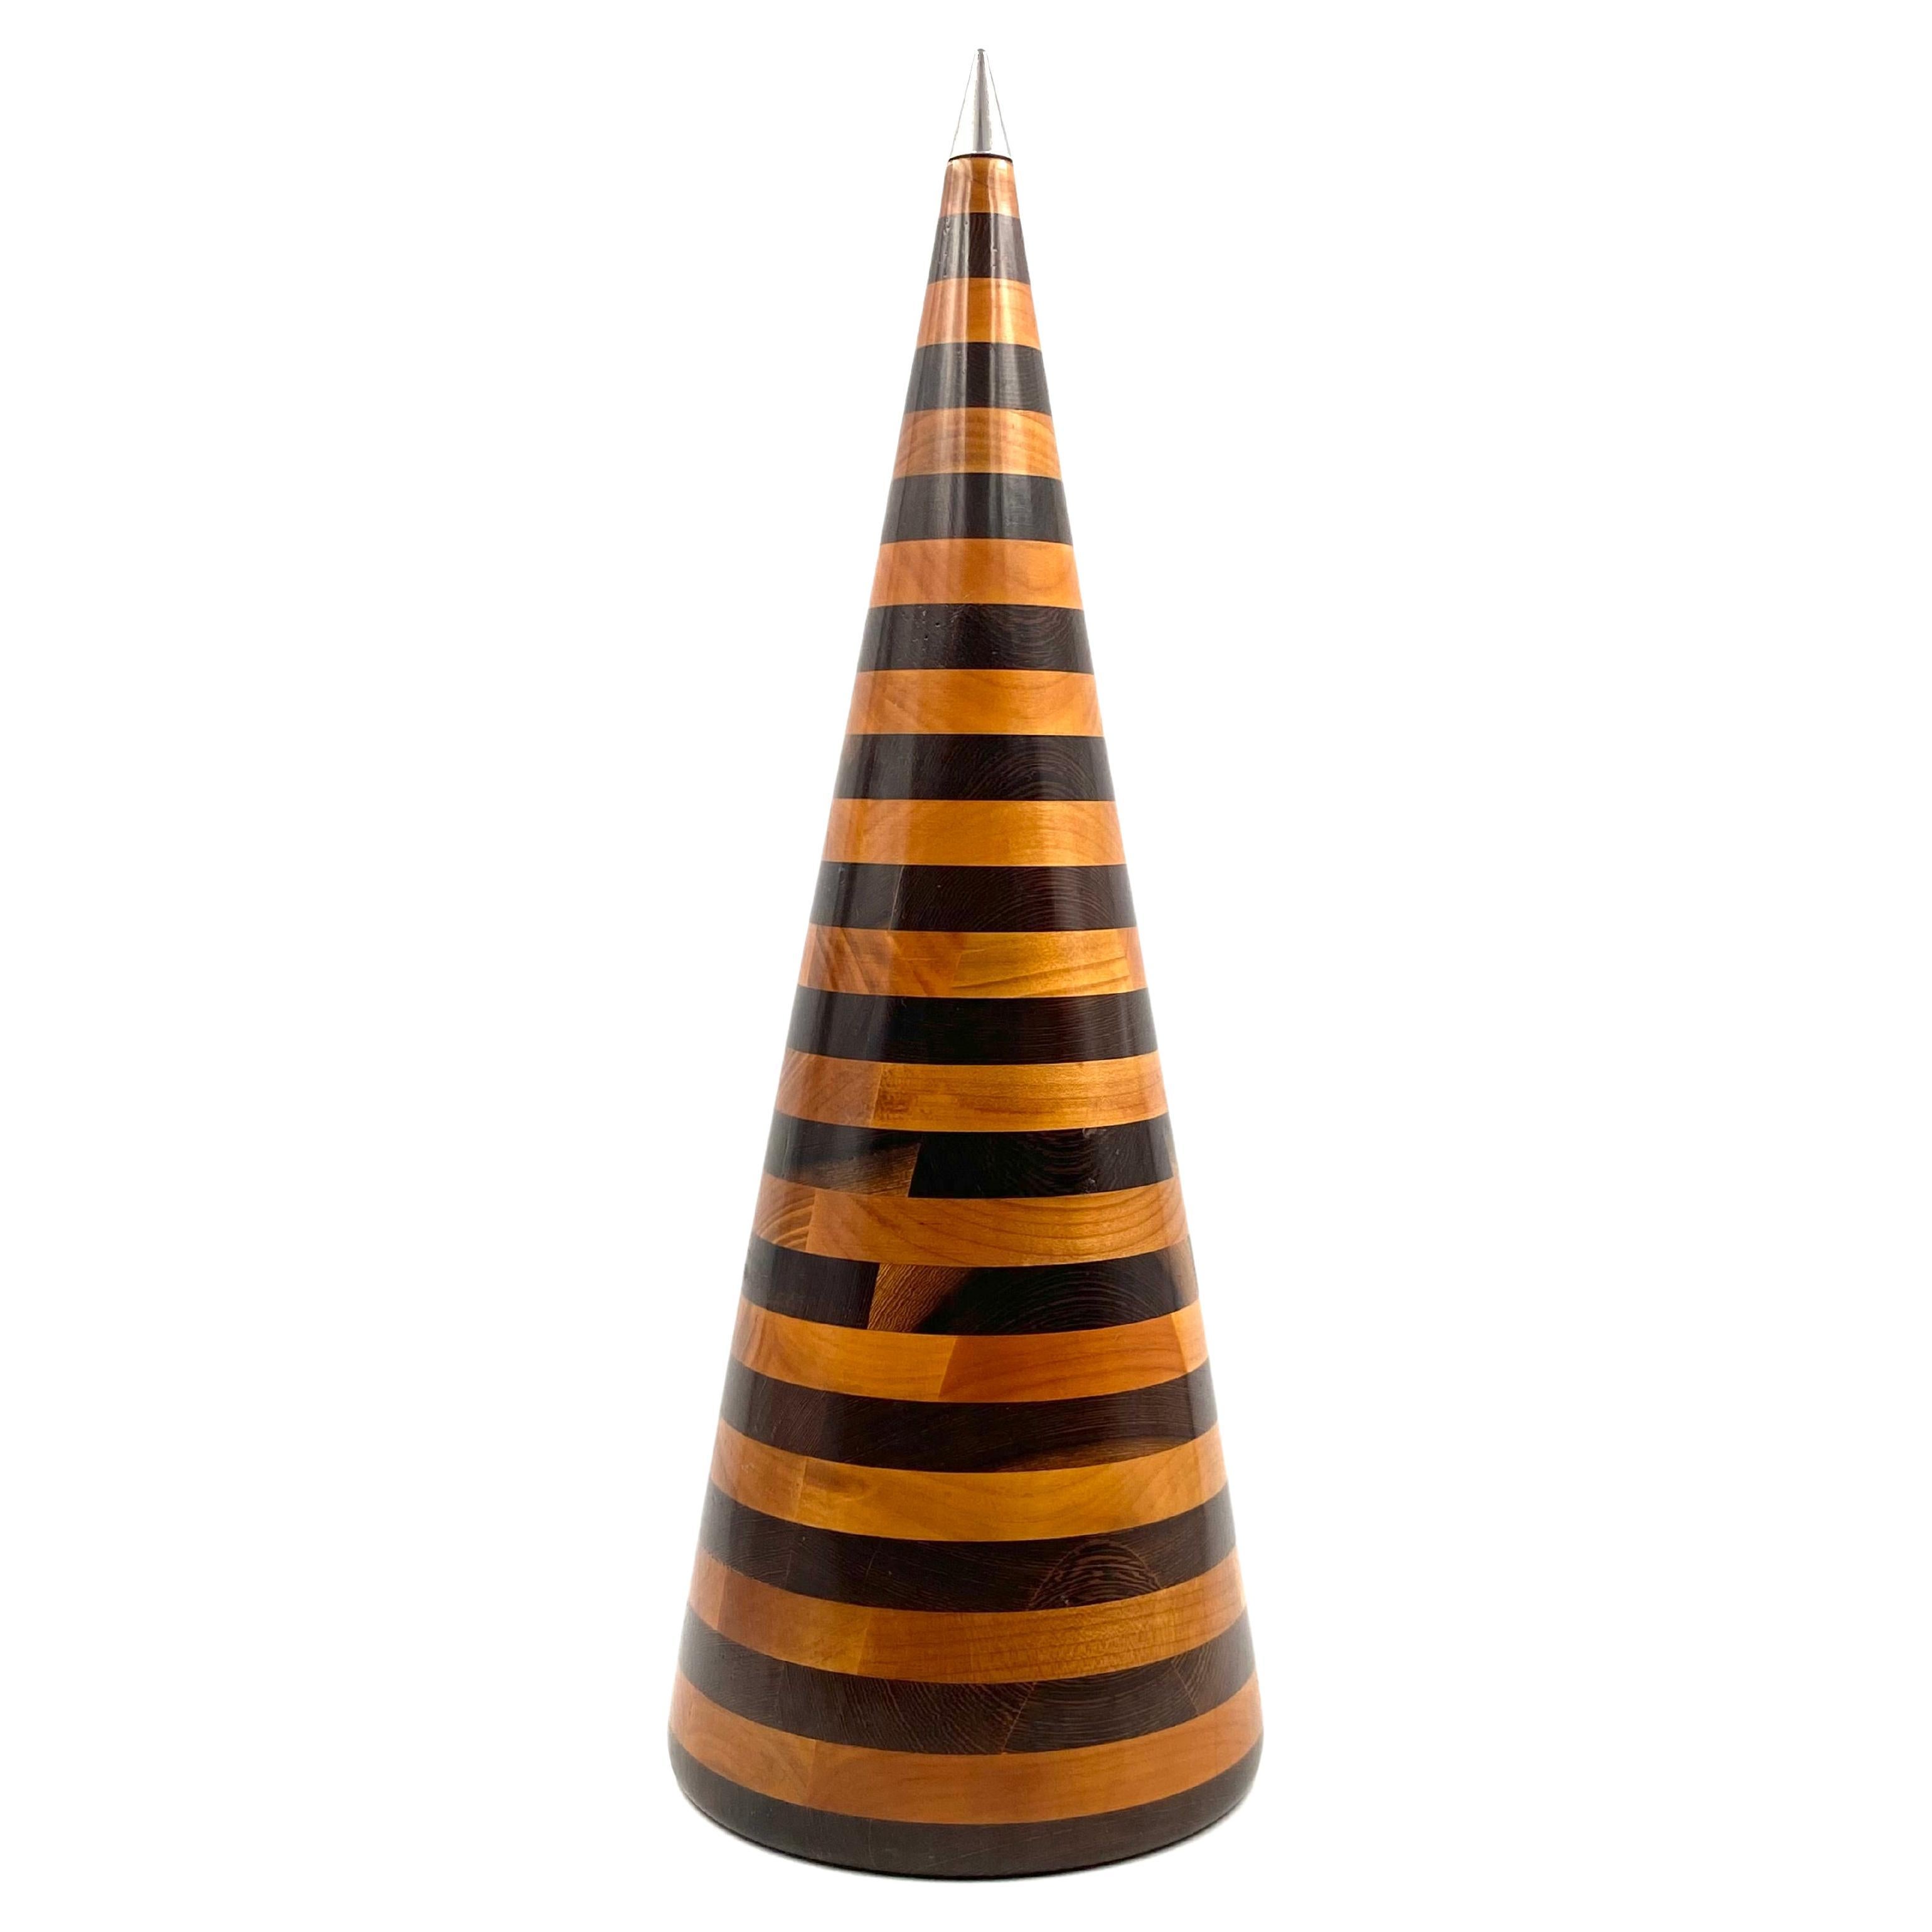 Conic Solid Wood Sculpture, Salmistraro, Italy, 1970s